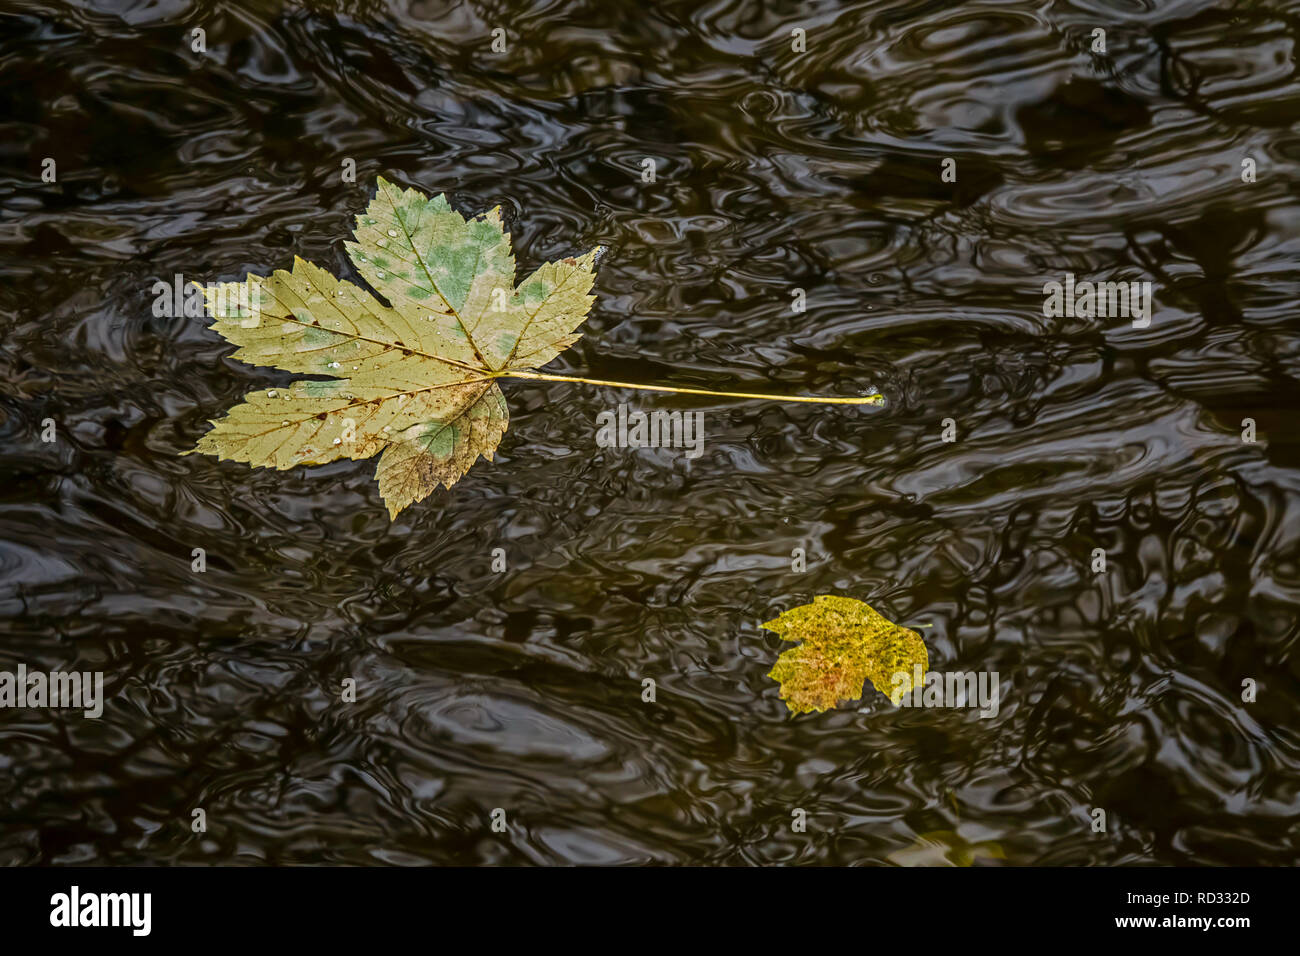 2 maple leaves floating on water surface Stock Photo